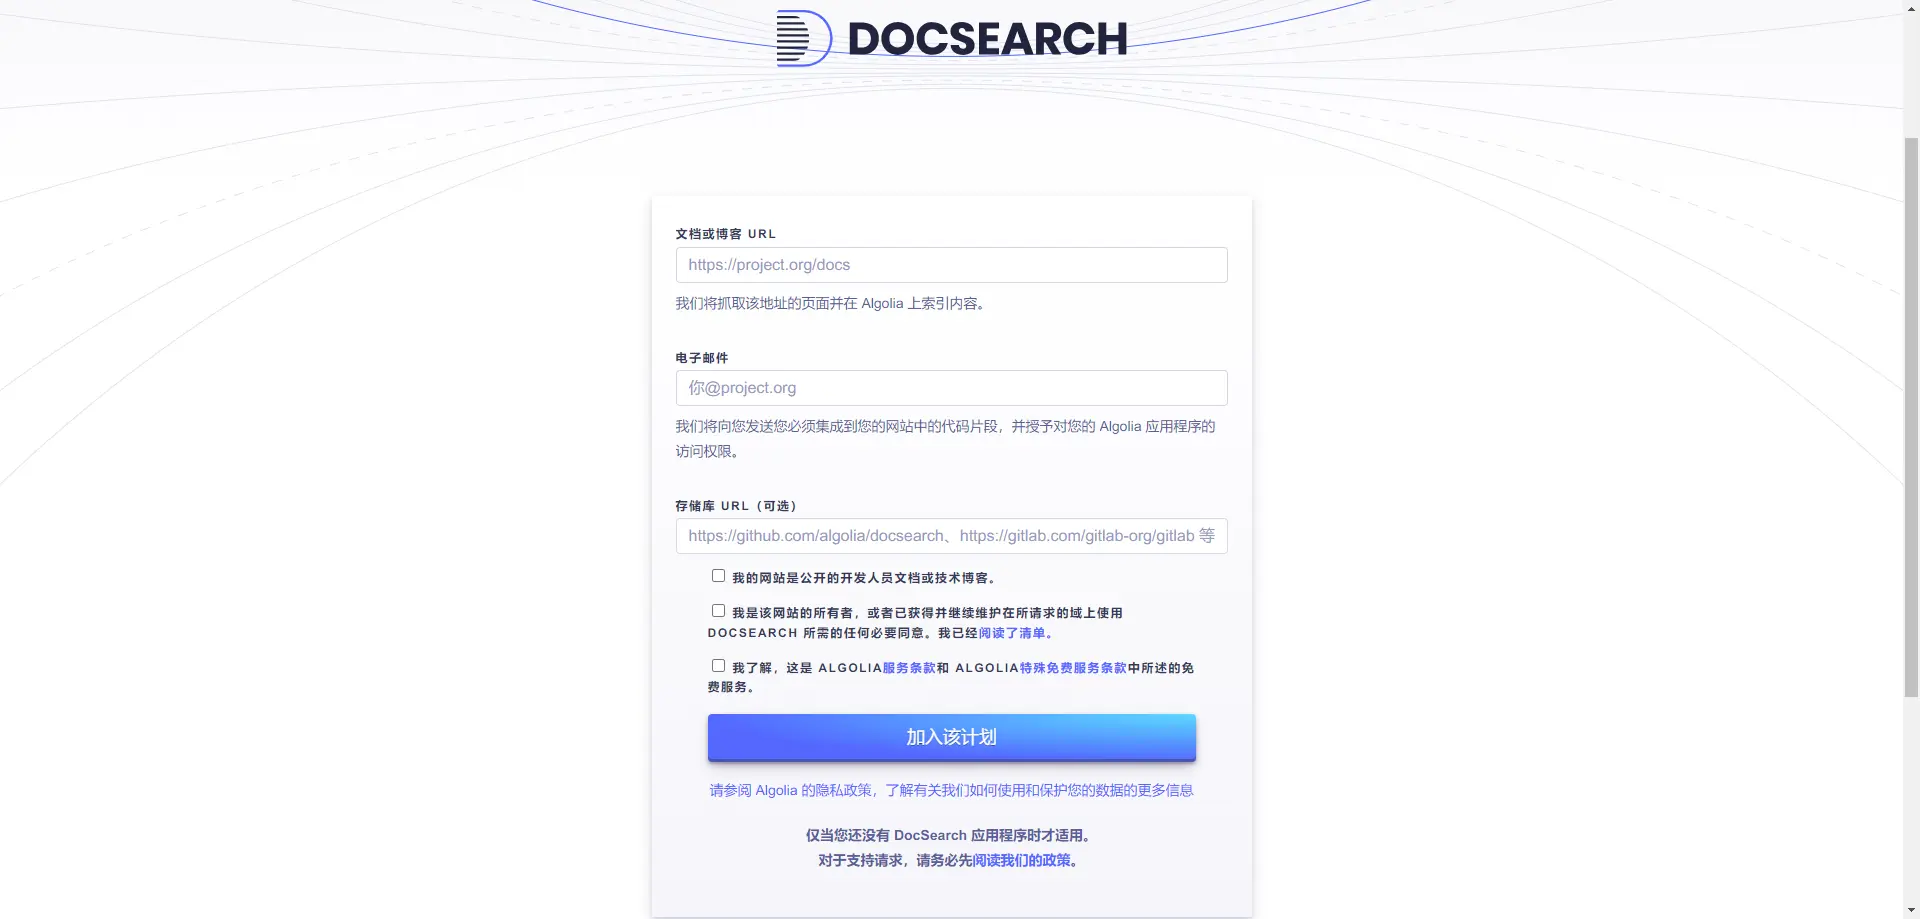 DocSearch申请页面